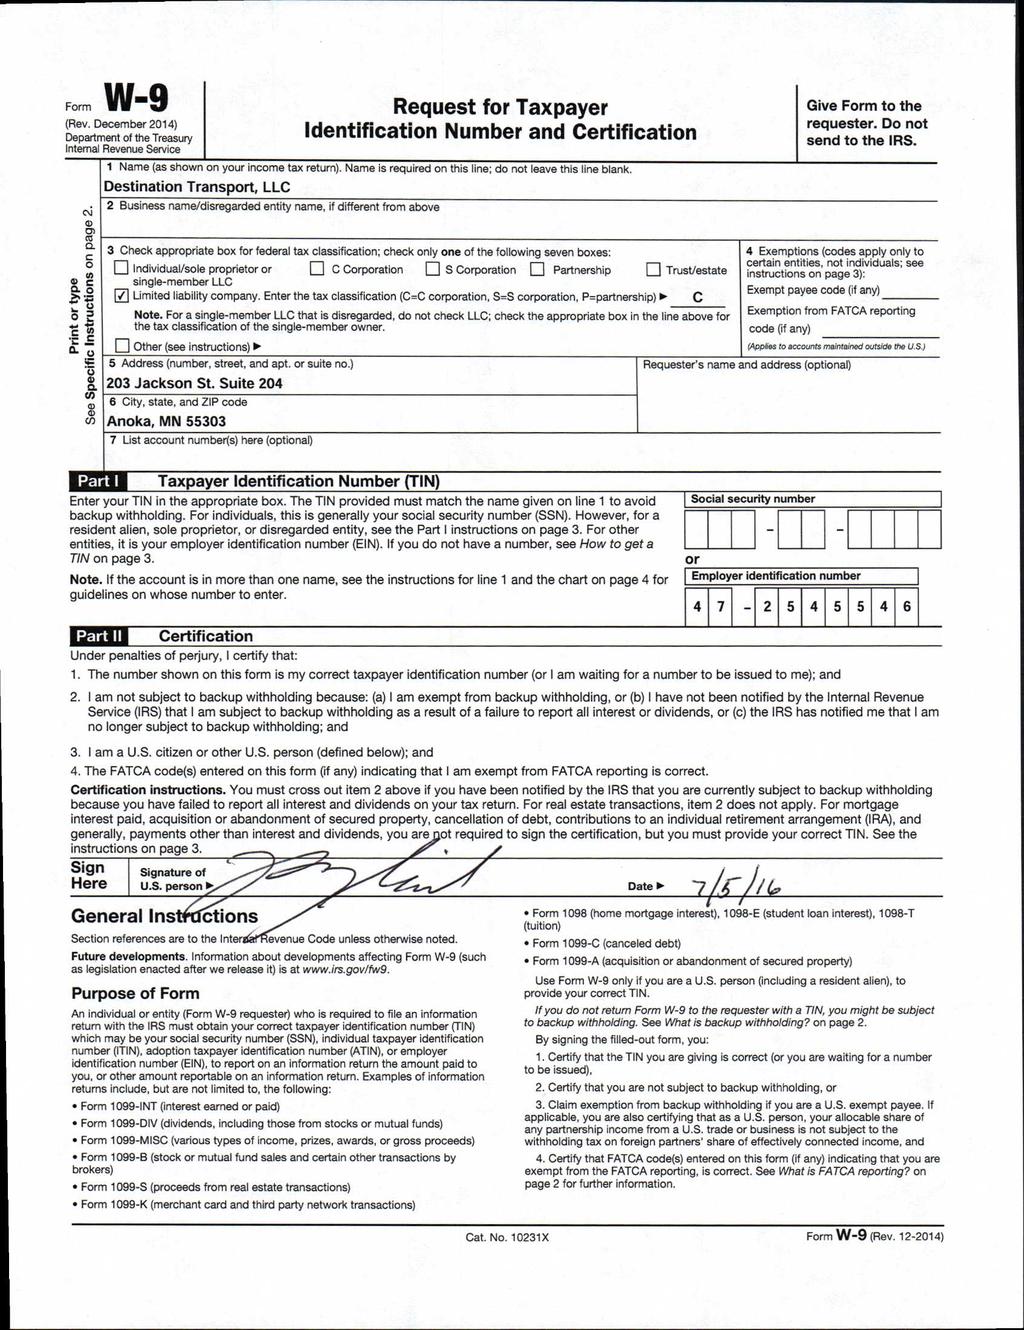 'orm W'9 Rev. December 2014) )epartment of the Treasury ntemal Revenue Service Print or type See Specific Instructions on page 2.